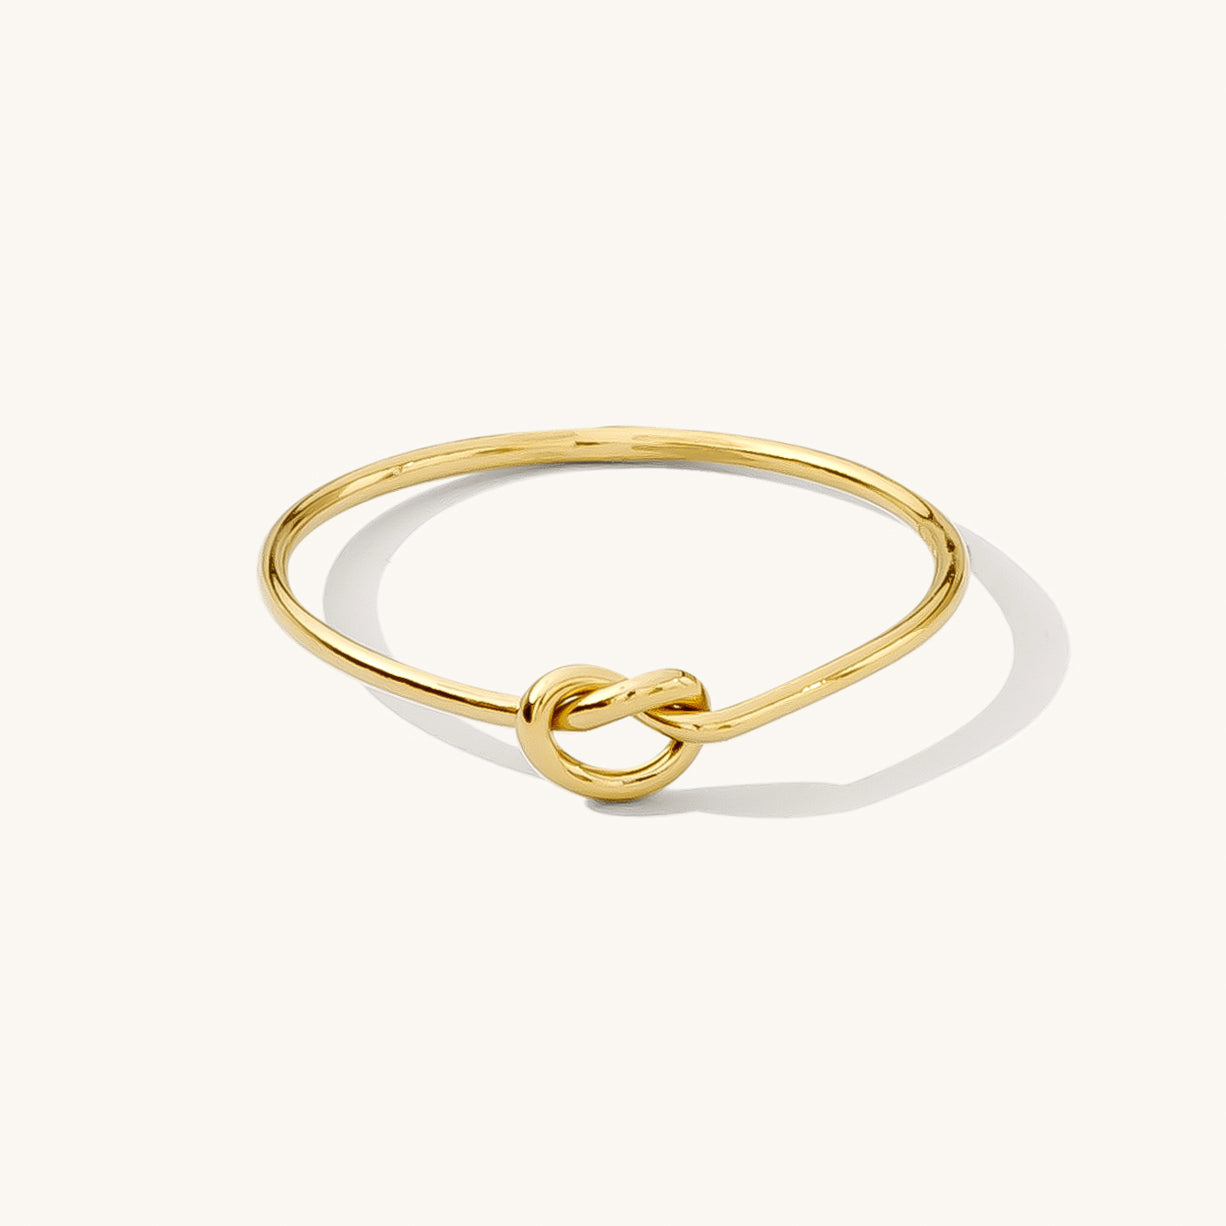 Love Knot Ring - Gold Filled / Size 3